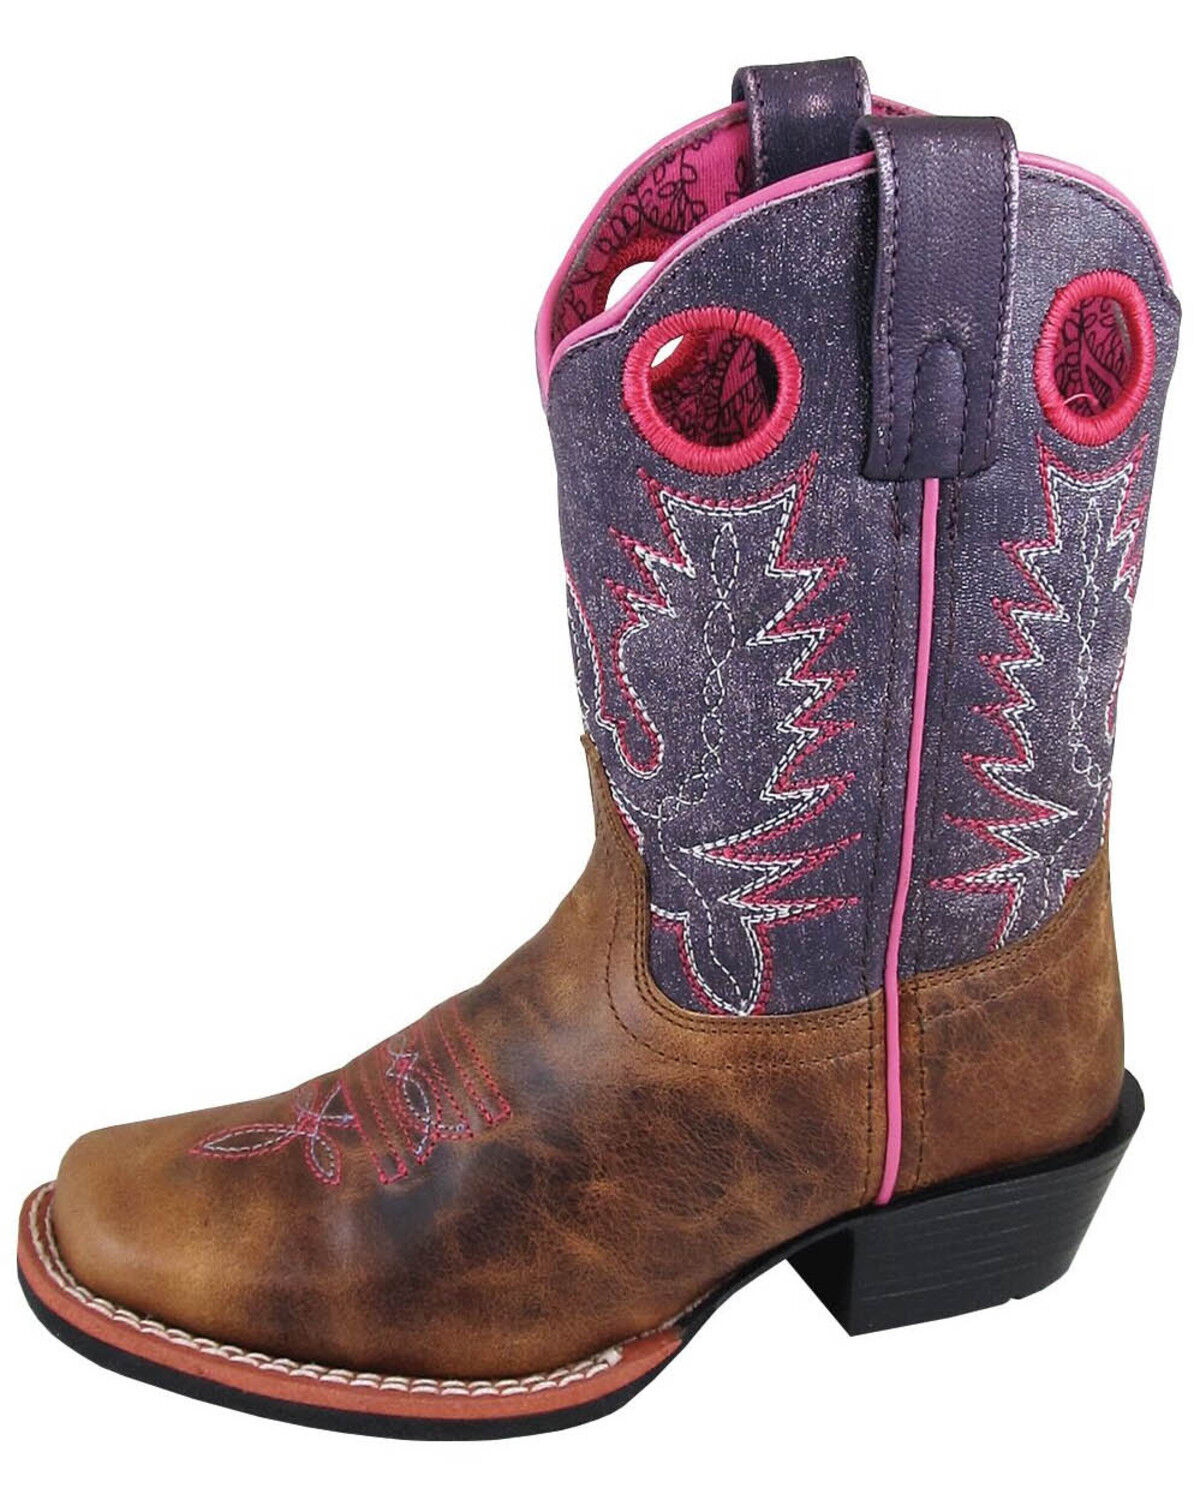 GIRLS ZIP UP COWBOY BOOTS BY CUTIE H5016 SALE NOW £19.99 